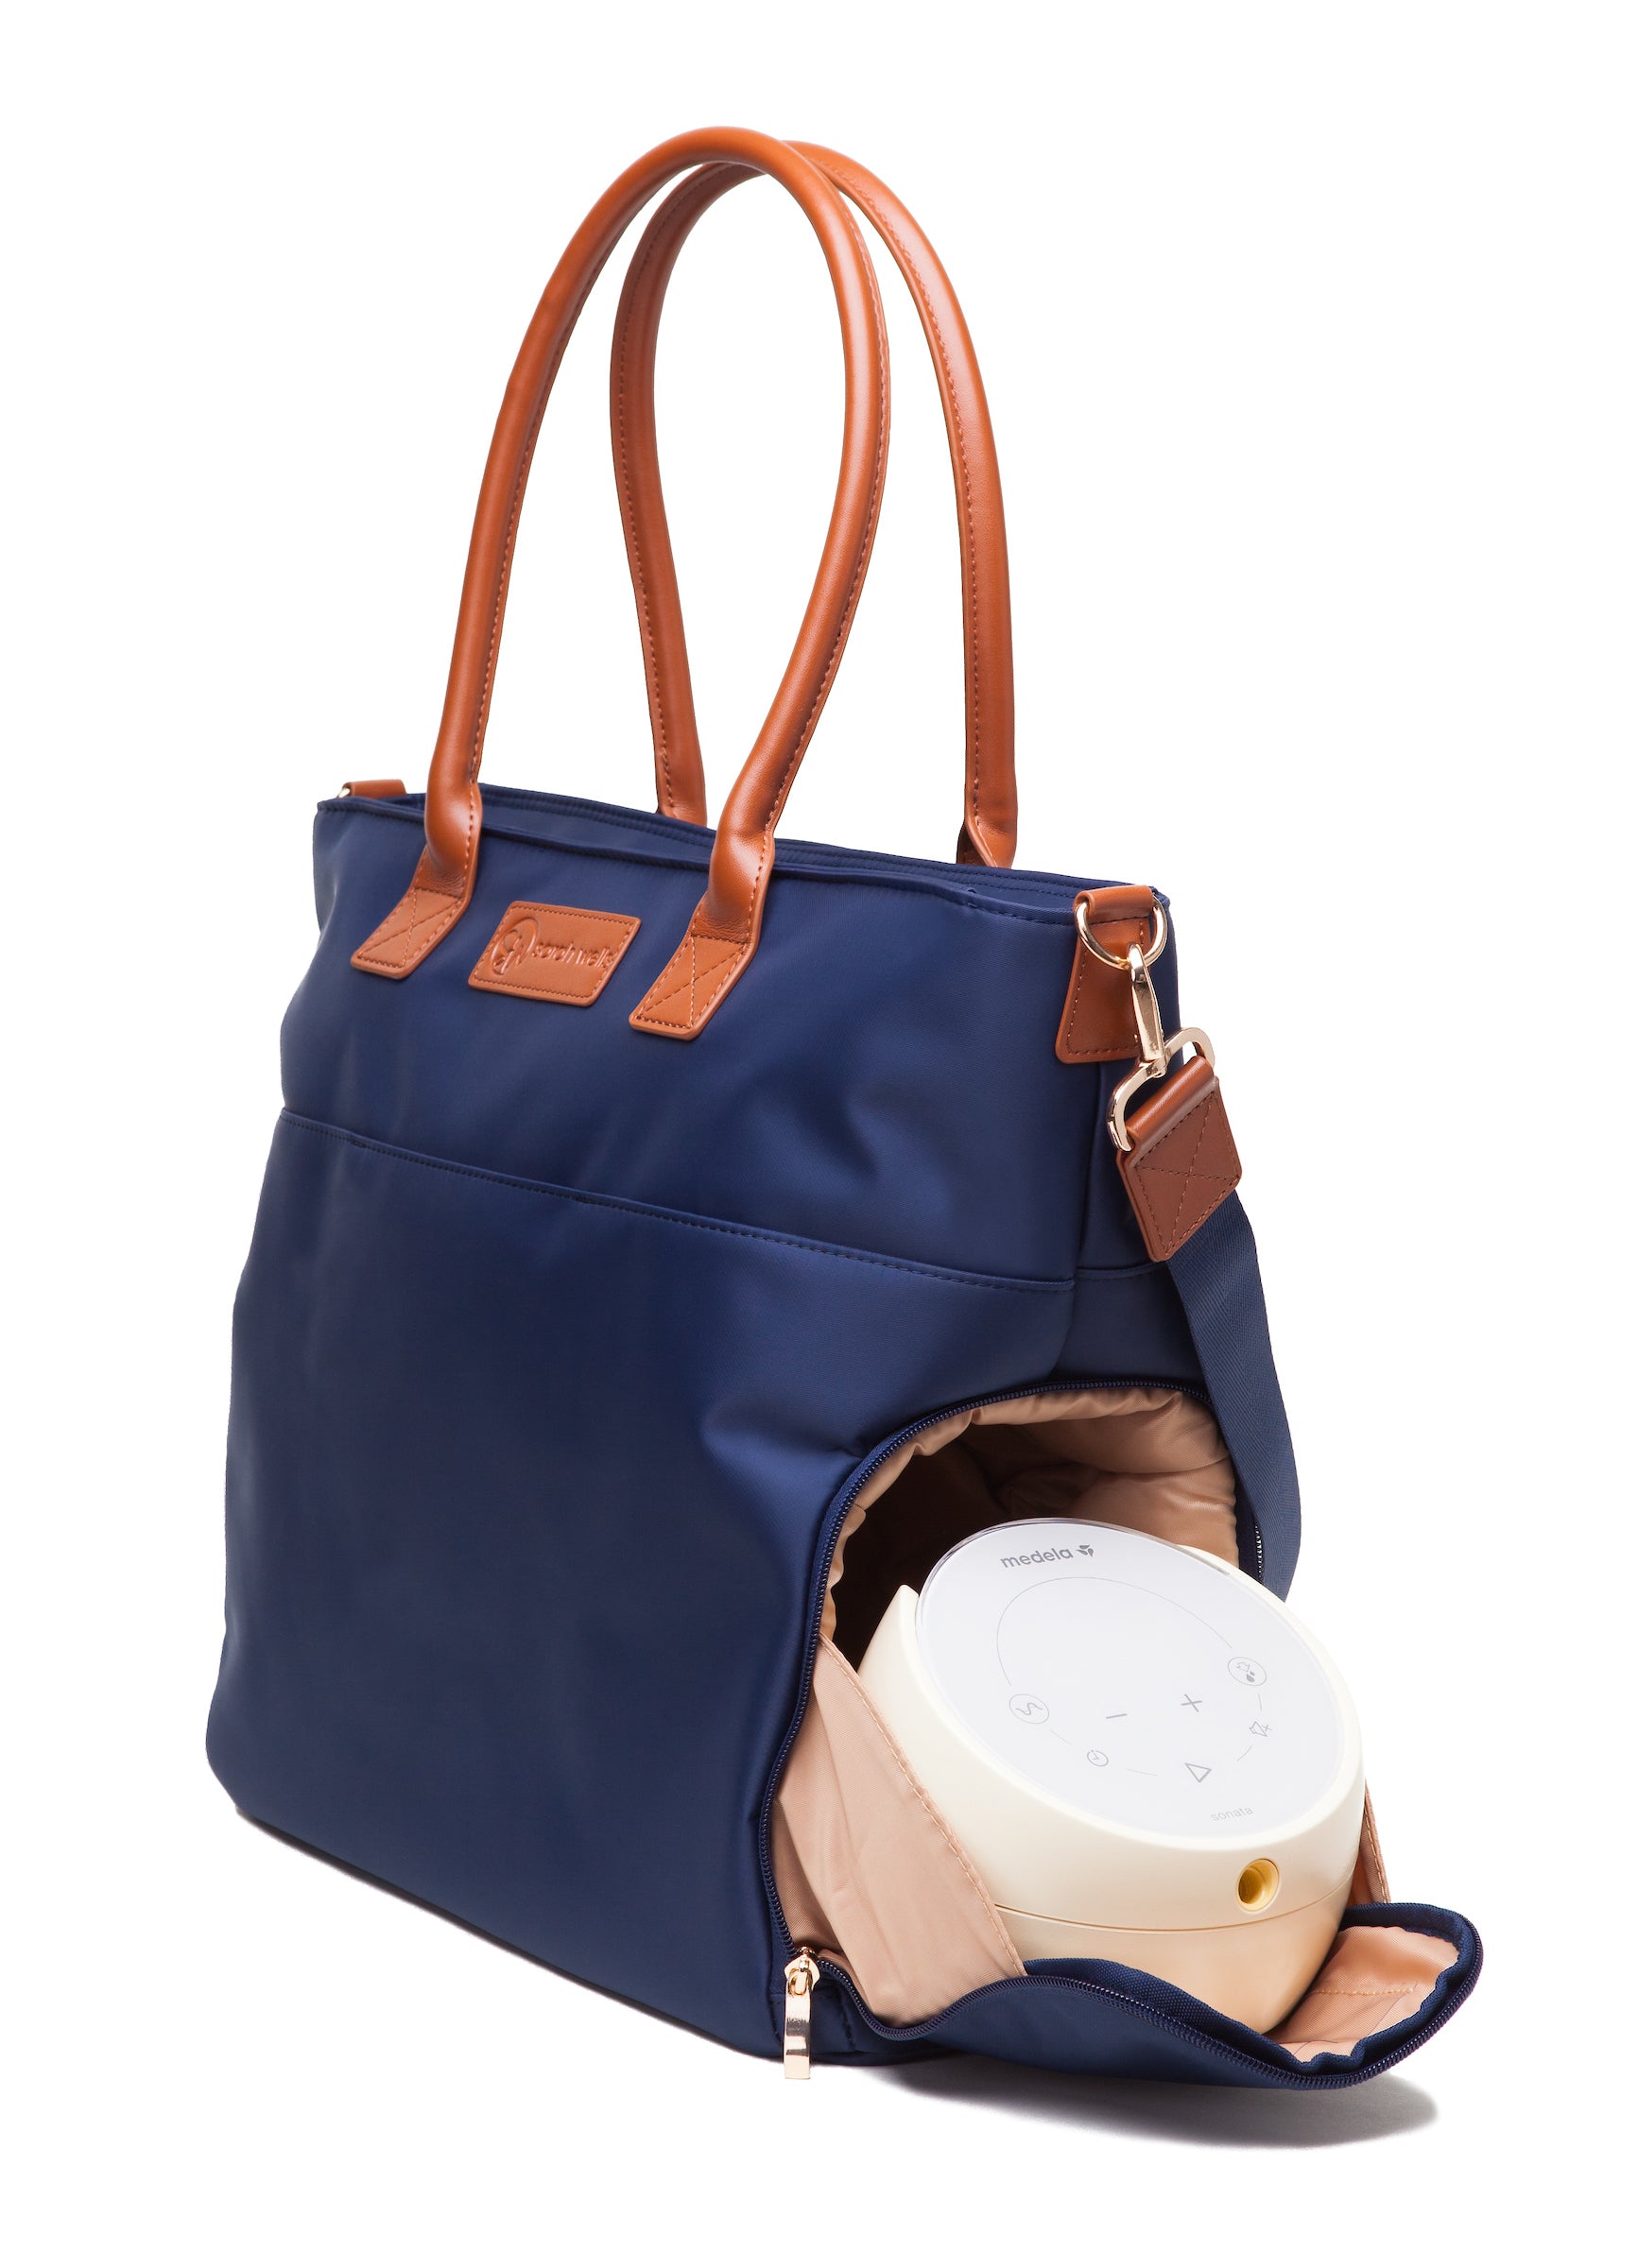 Abby (Navy) / Breast Pump Bags & Accessories from Sarah Wells